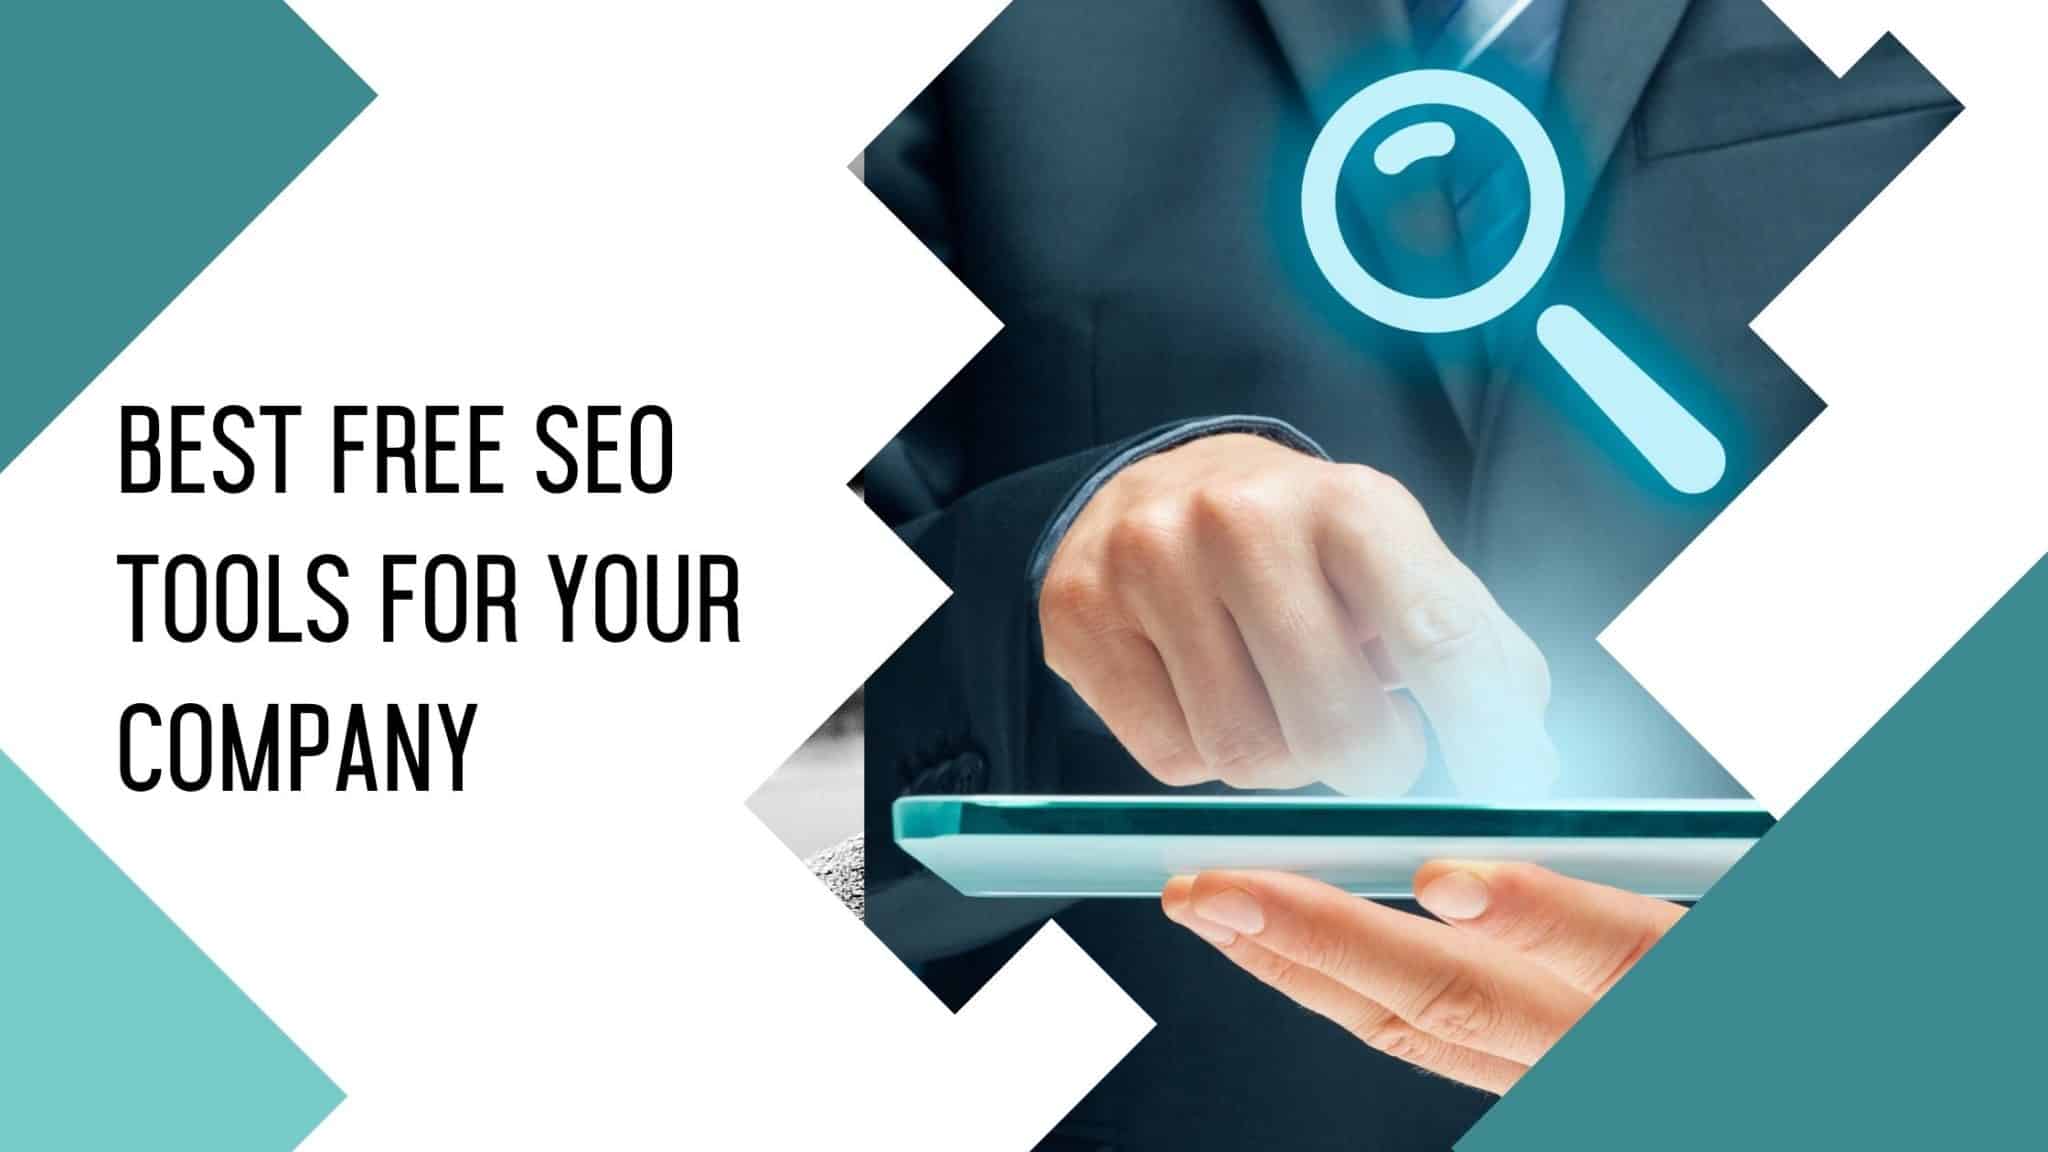 Featured image for “The Best Free SEO Tools”